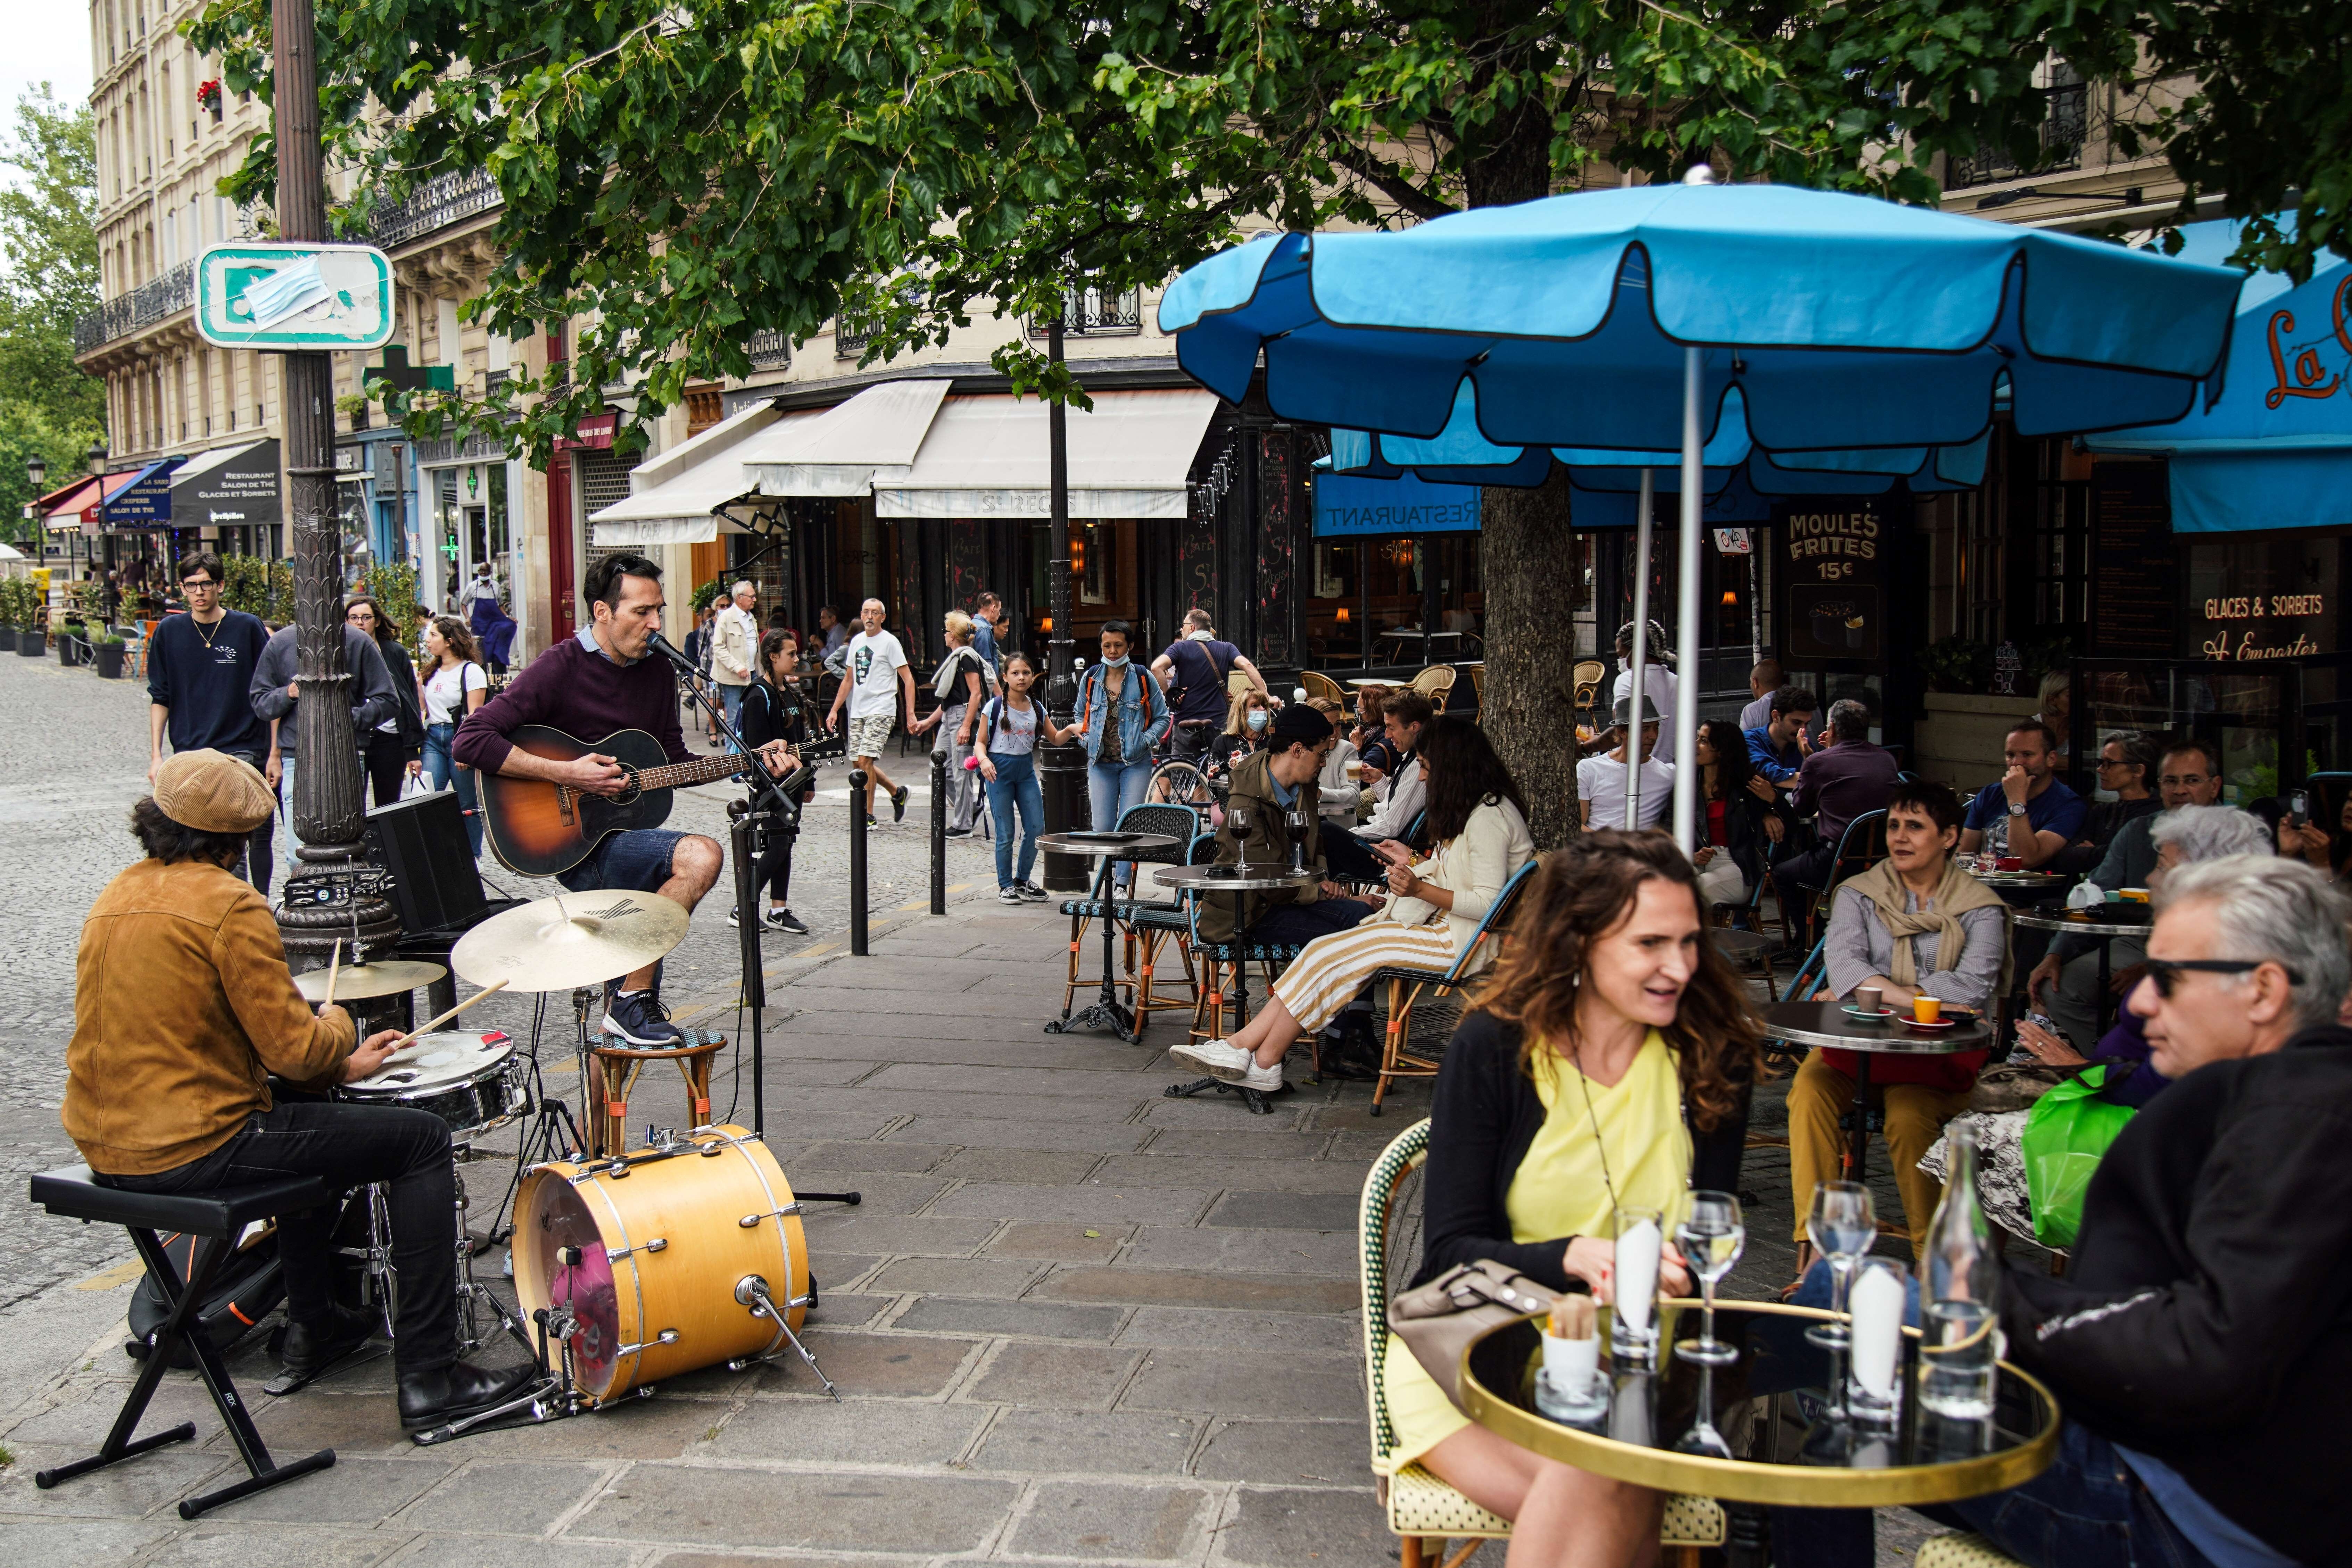 A band plays music in front of a restaurant in Paris as the city eases from Covid-19 lockdown. Photo: Abdulmonam Eassa/AFP via Getty Images